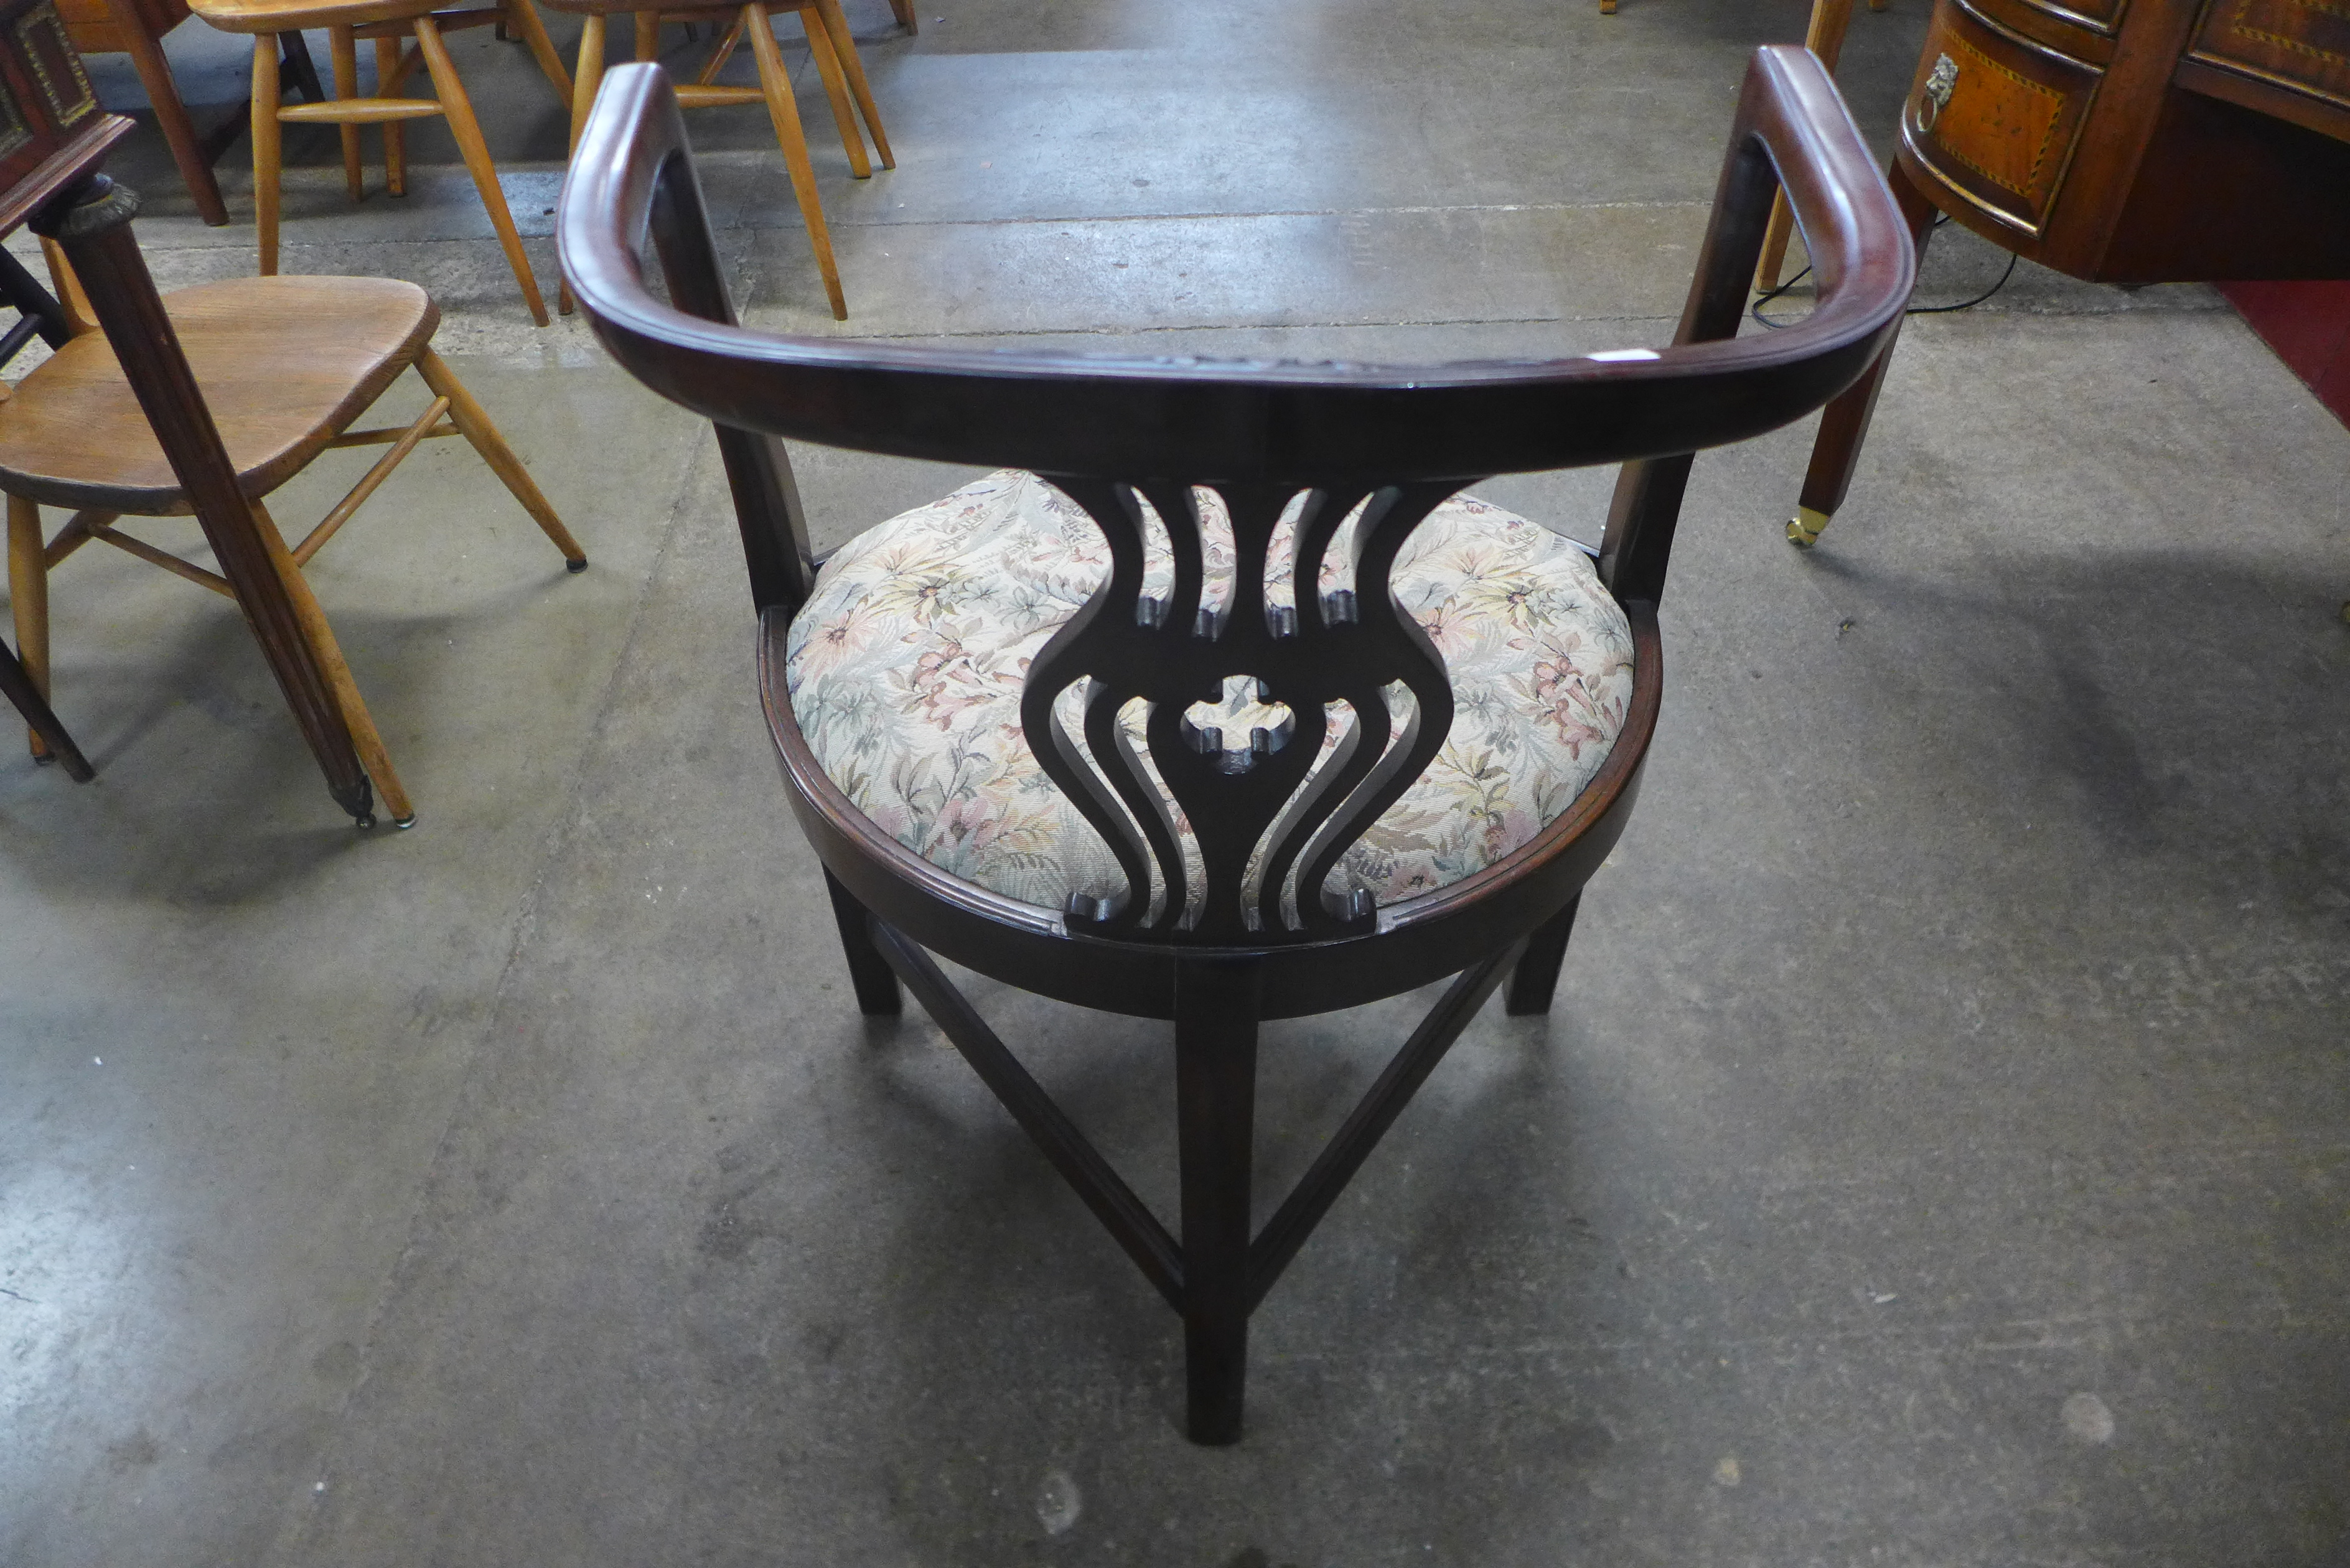 A Chippendale Revival mahogany elbow chair - Image 2 of 2